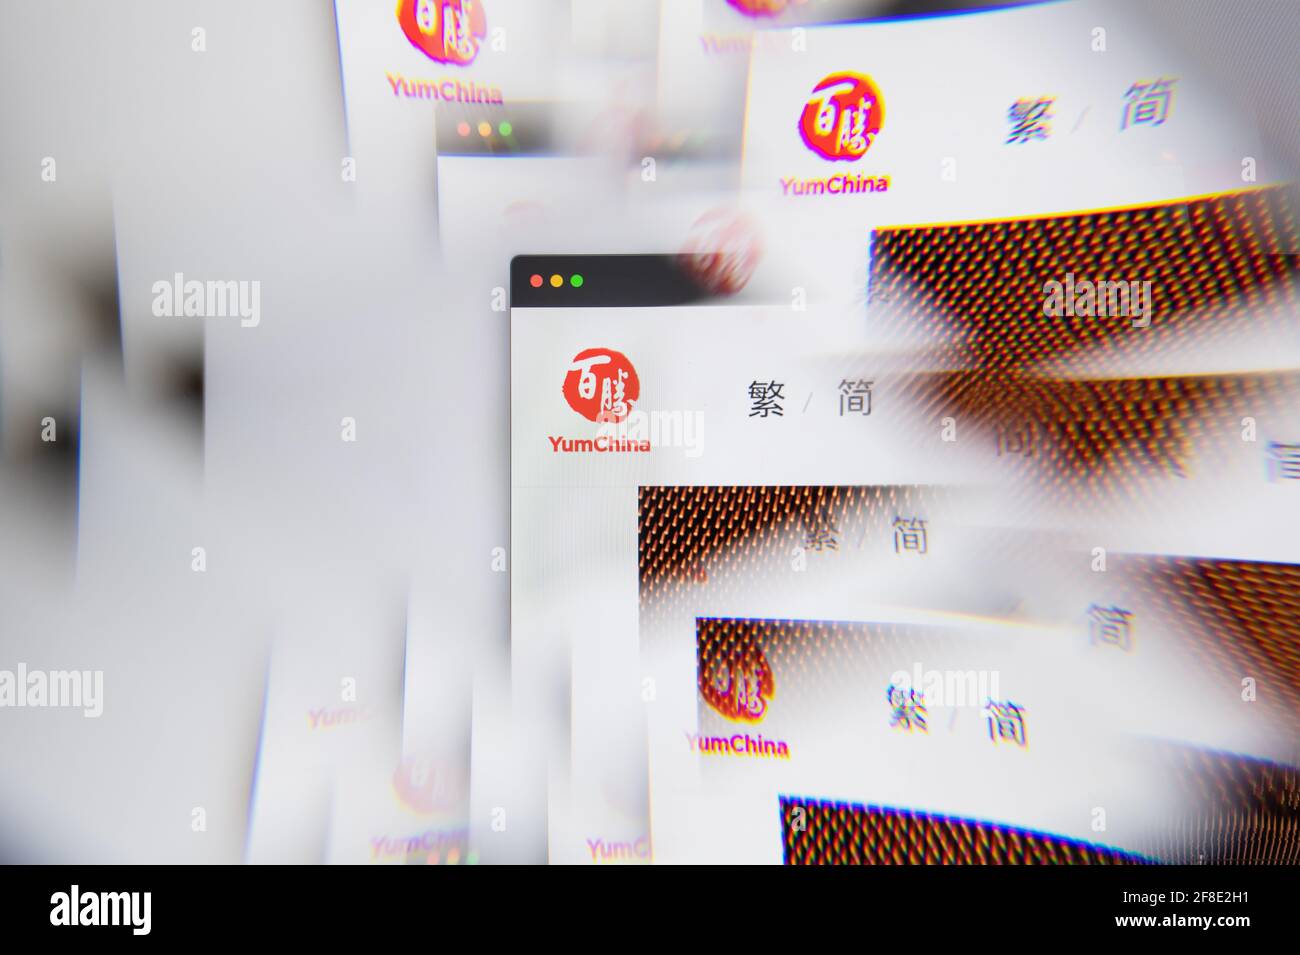 Milan, Italy - APRIL 10, 2021: Yum China logo on laptop screen seen through an optical prism. Illustrative editorial image from Yum China website. Stock Photo